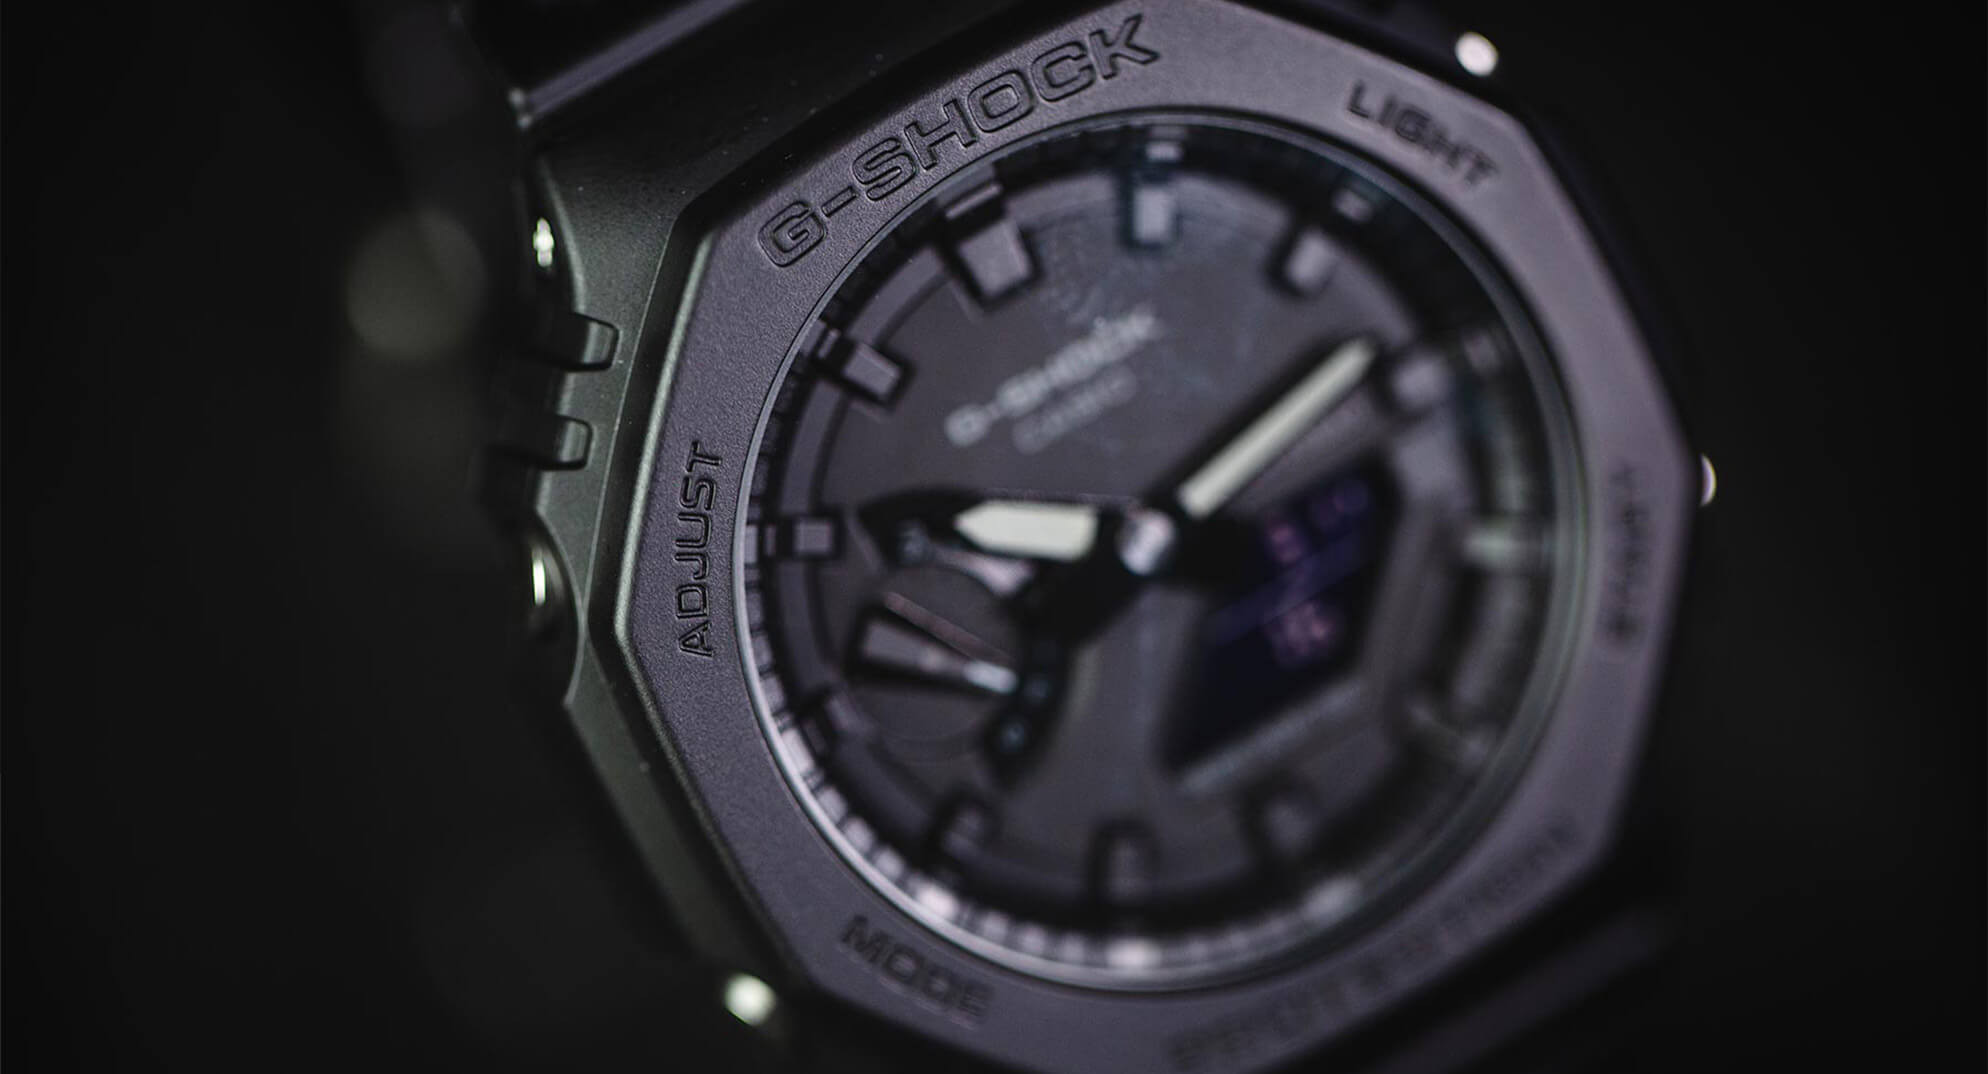 Simple and Effective: the G-Shock Carbon Core Guard GA-2100-1A1DR